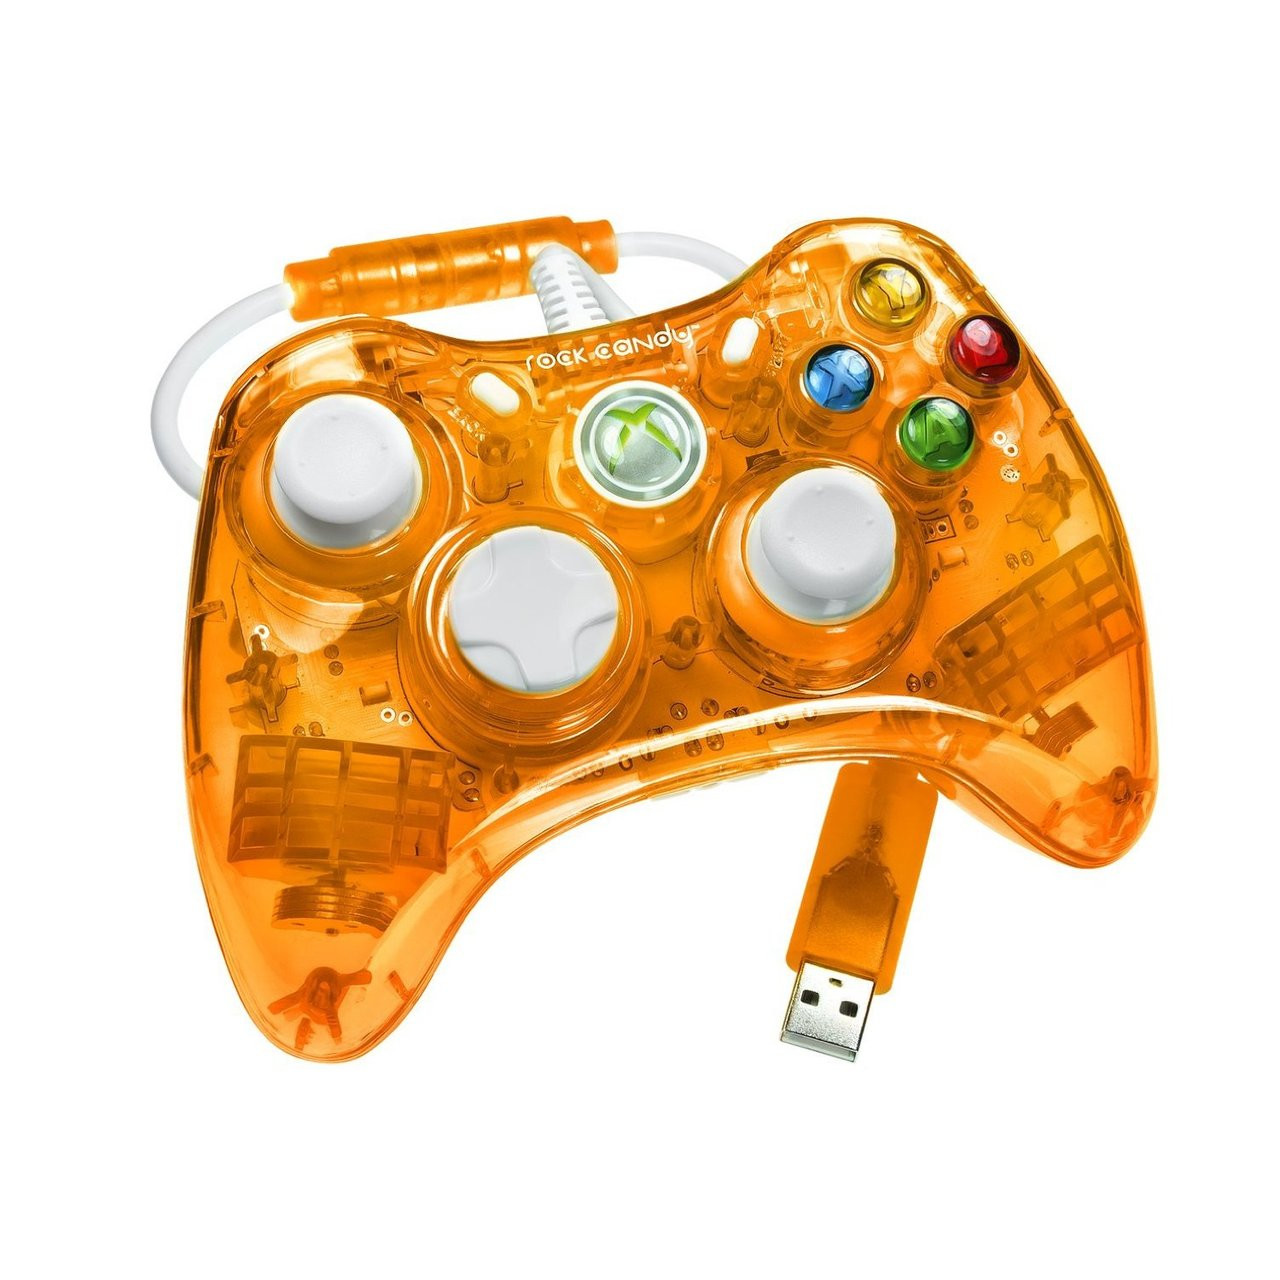 PDP Rock Candy Xbox 360 Controller - Green